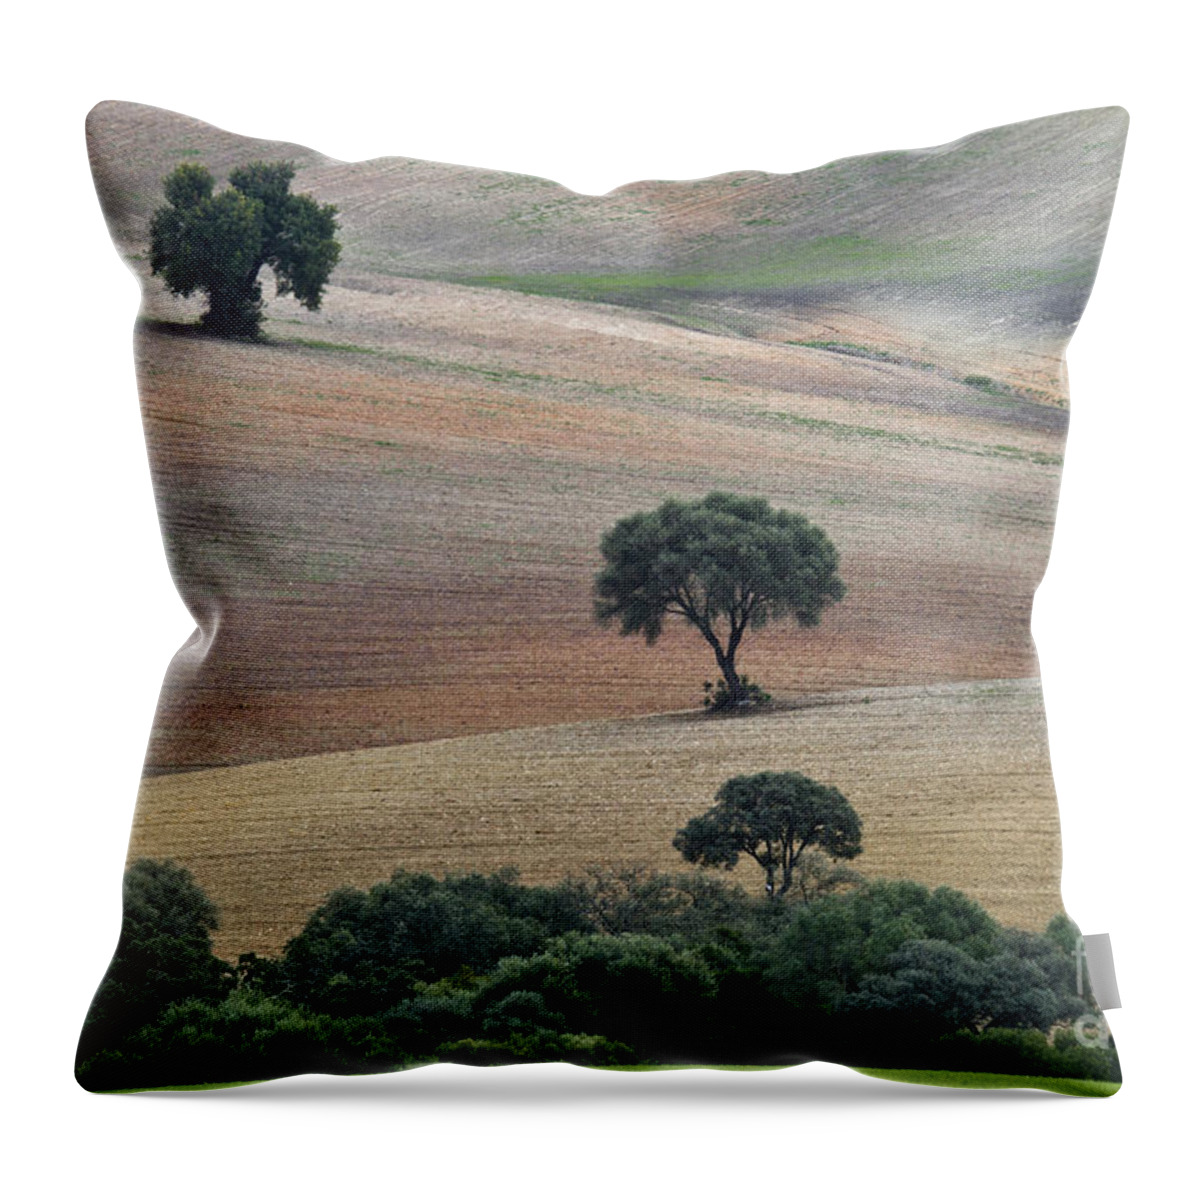 Landscape Throw Pillow featuring the photograph Andalusian Landscape by Heiko Koehrer-Wagner